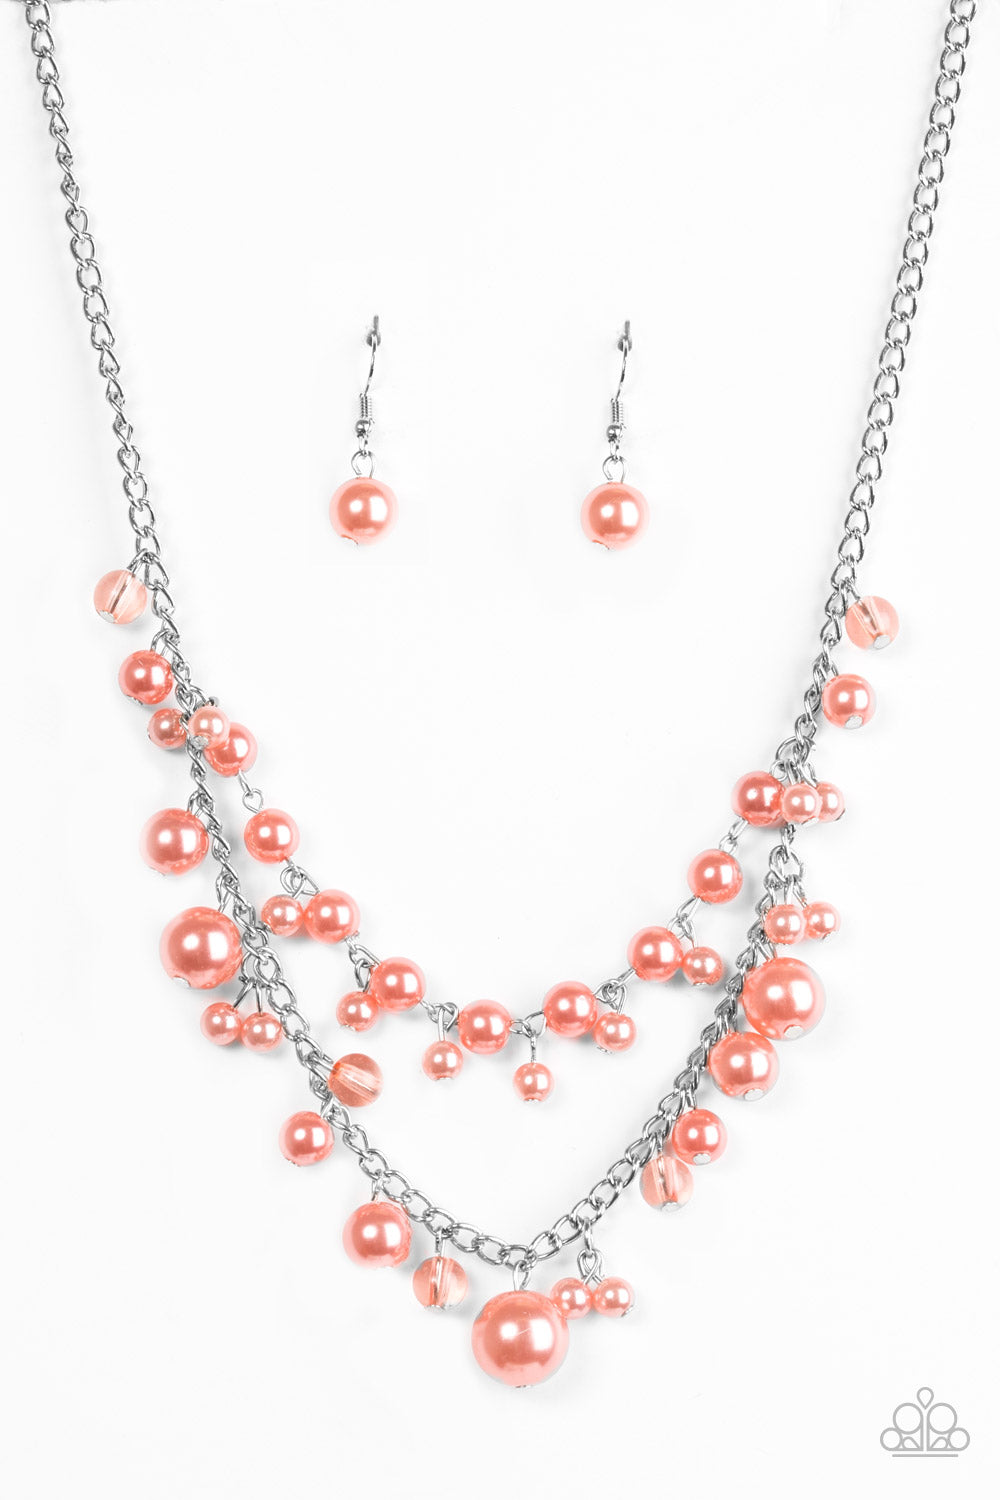 Featuring glassy and pearly finishes, dainty coral beads swing from the bottom of layered silver chains, creating a bubbly fringe below the collar. Features an adjustable clasp closure.